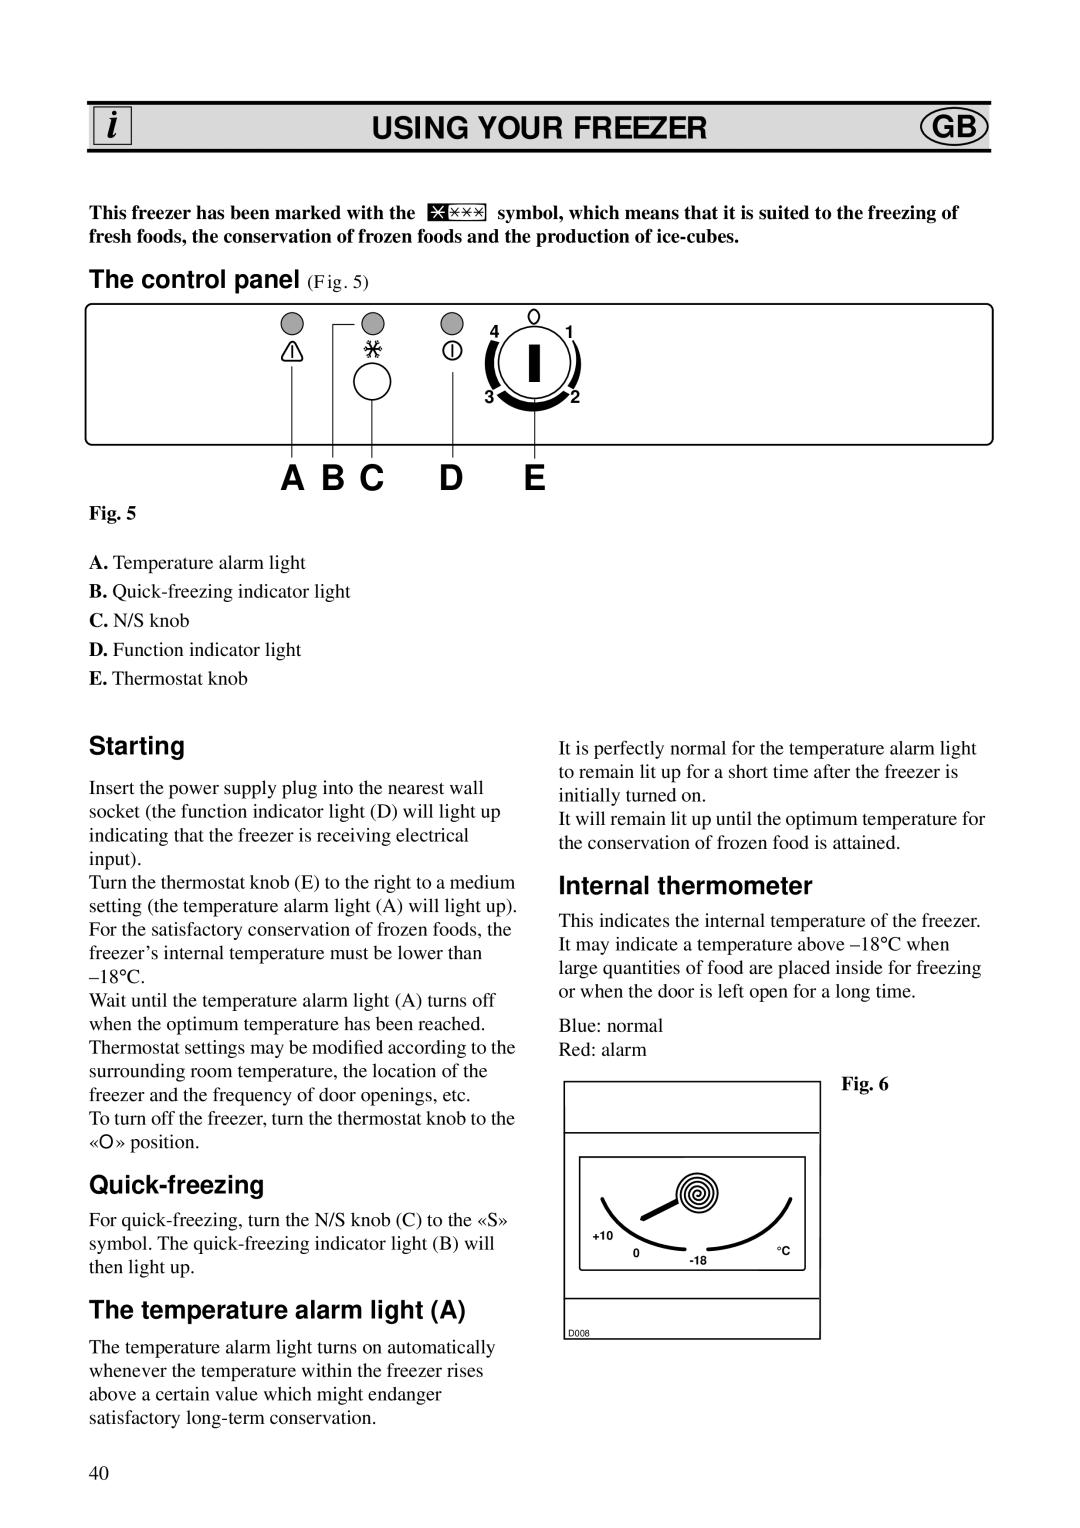 AEG 2073-4 GS manual Using Your Freezer, The control panel Fig, Starting, Internal thermometer, Quick-freezing, A B C D E 